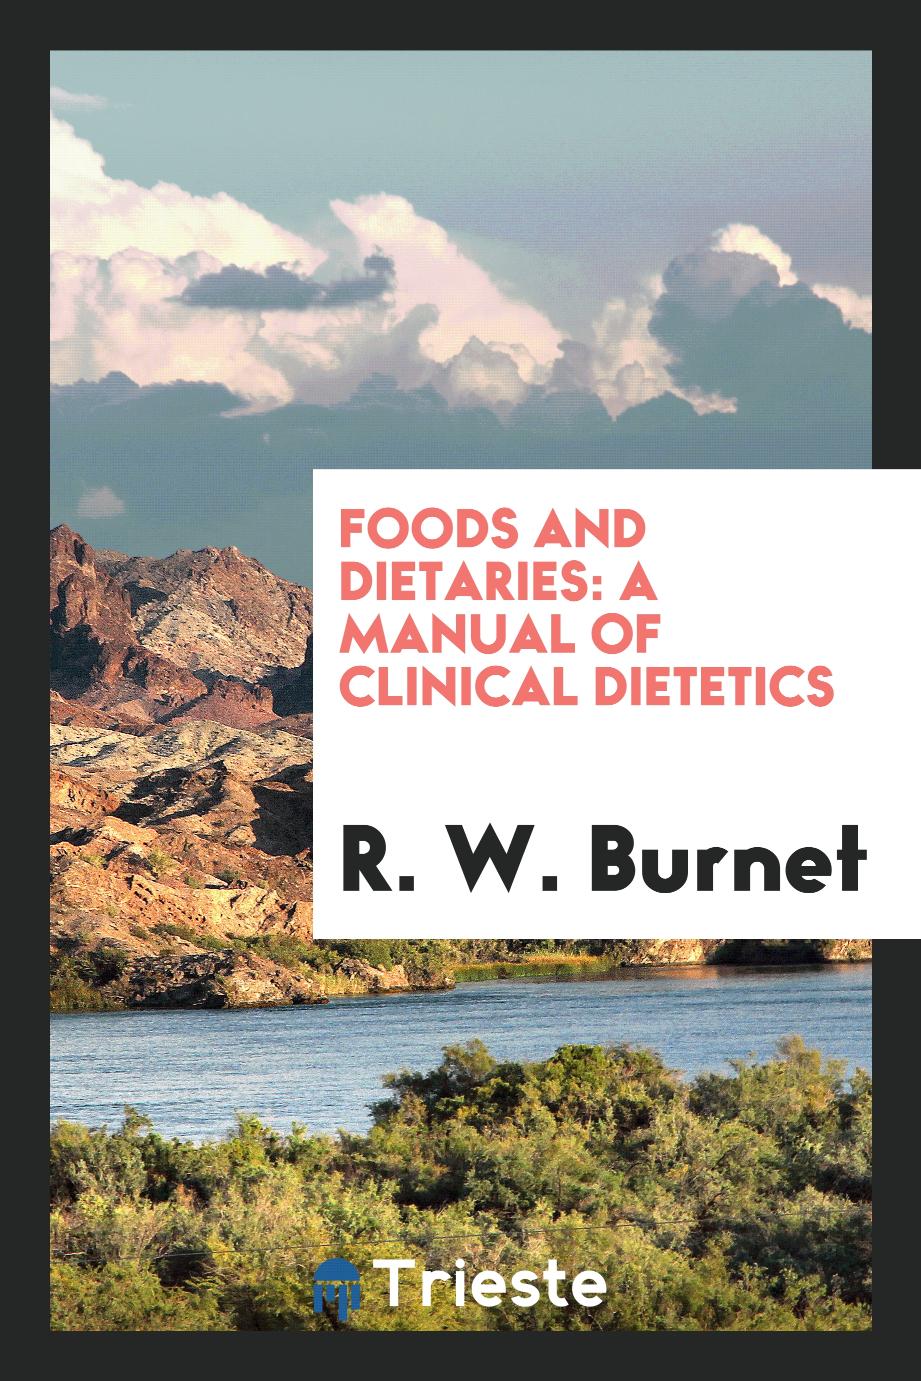 Foods and dietaries: a manual of clinical dietetics